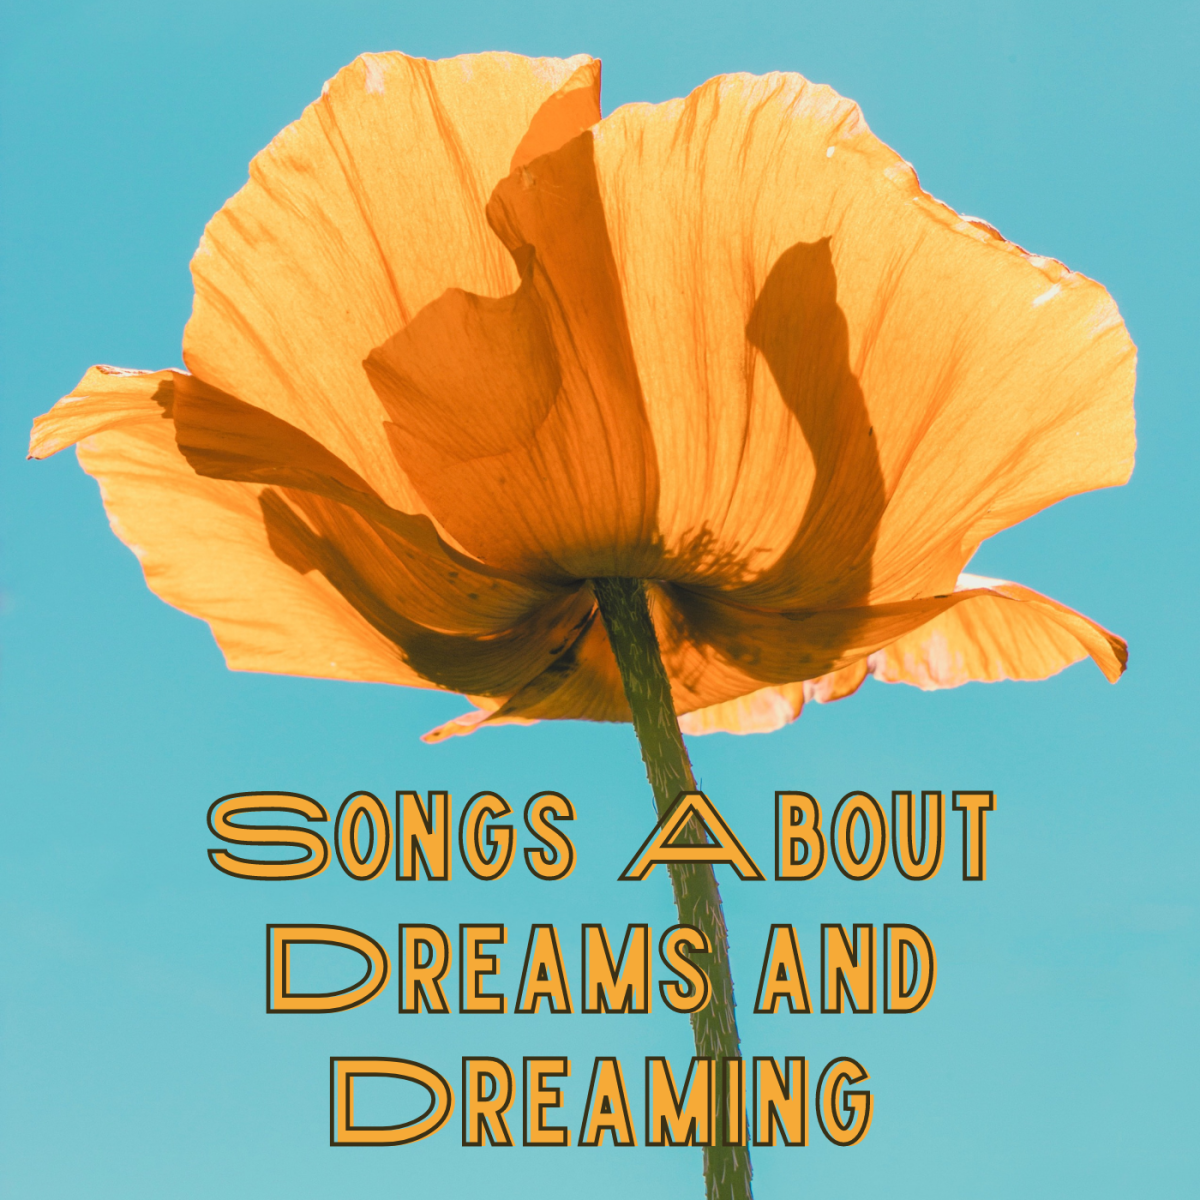 Celebrate the magic and power of dreaming with a playlist of rock, pop, and country songs about dreams. We have a large list of songs to start you out.